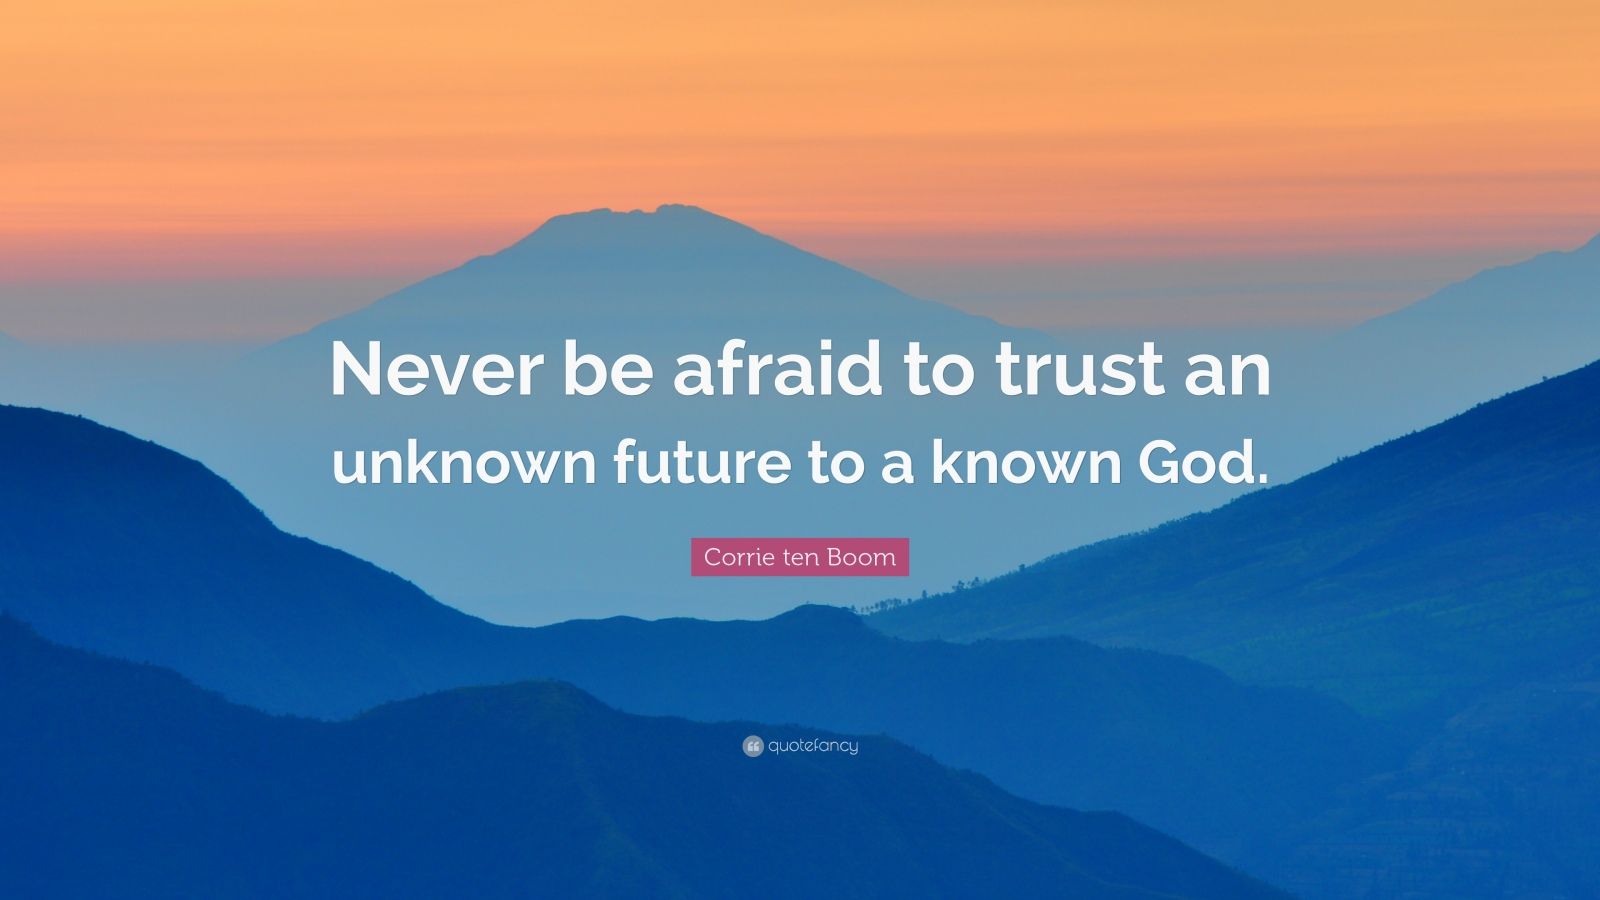 Corrie ten Boom Quote: “Never be afraid to trust an unknown future to a